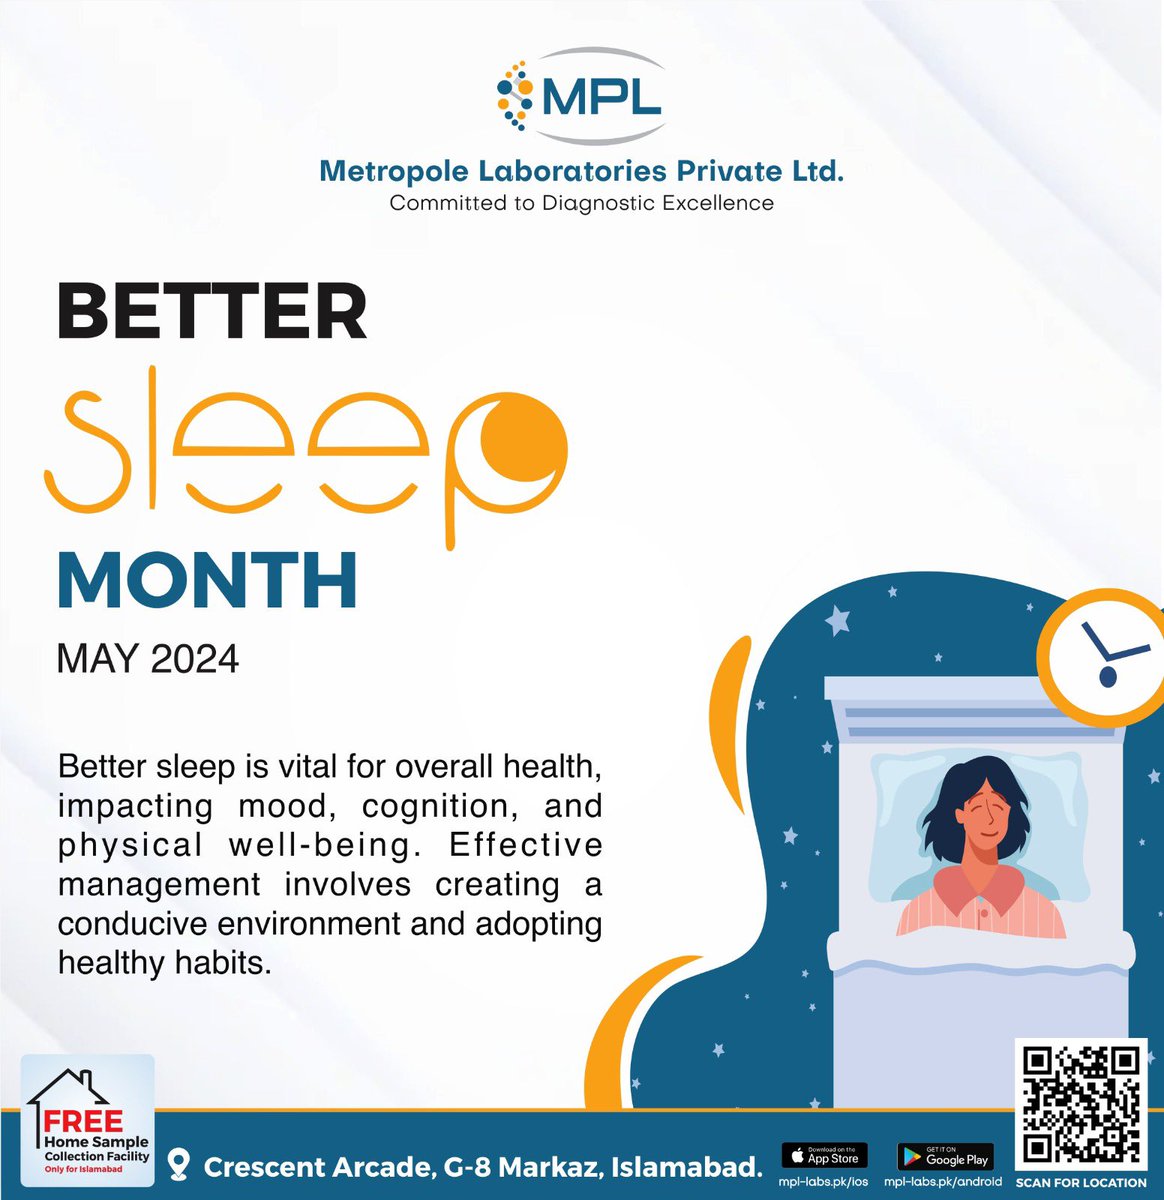 😴💤 Did you know May is #BetterSleepMonth? It's the perfect time to prioritize your sleep health and make positive changes to your bedtime routine. Say goodbye to restless nights and hello to sweet dreams! 💫 #SleepWell #HealthyHabits #mpllabs